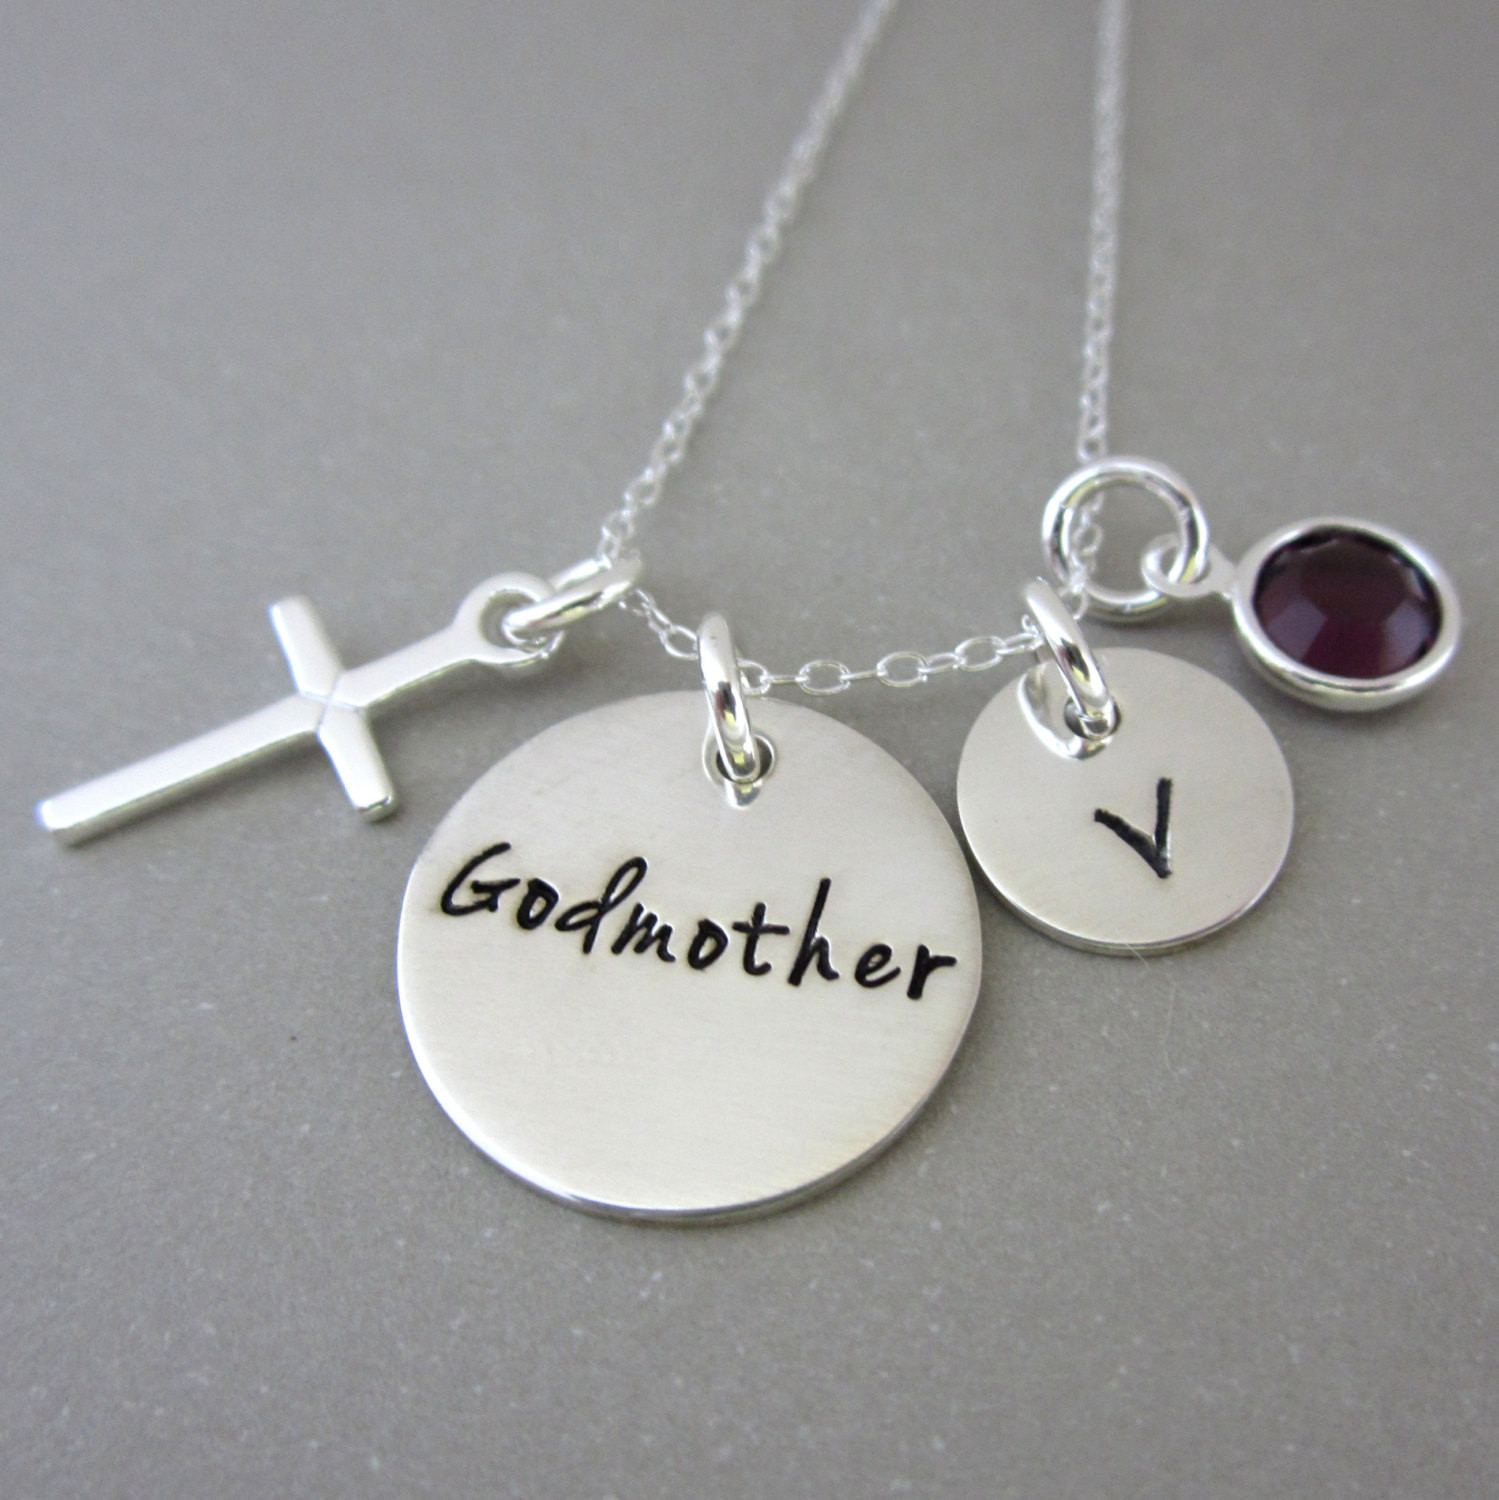 Gift Ideas For Godmother
 Godmother Personalized Gifts Gifts for Godparents by